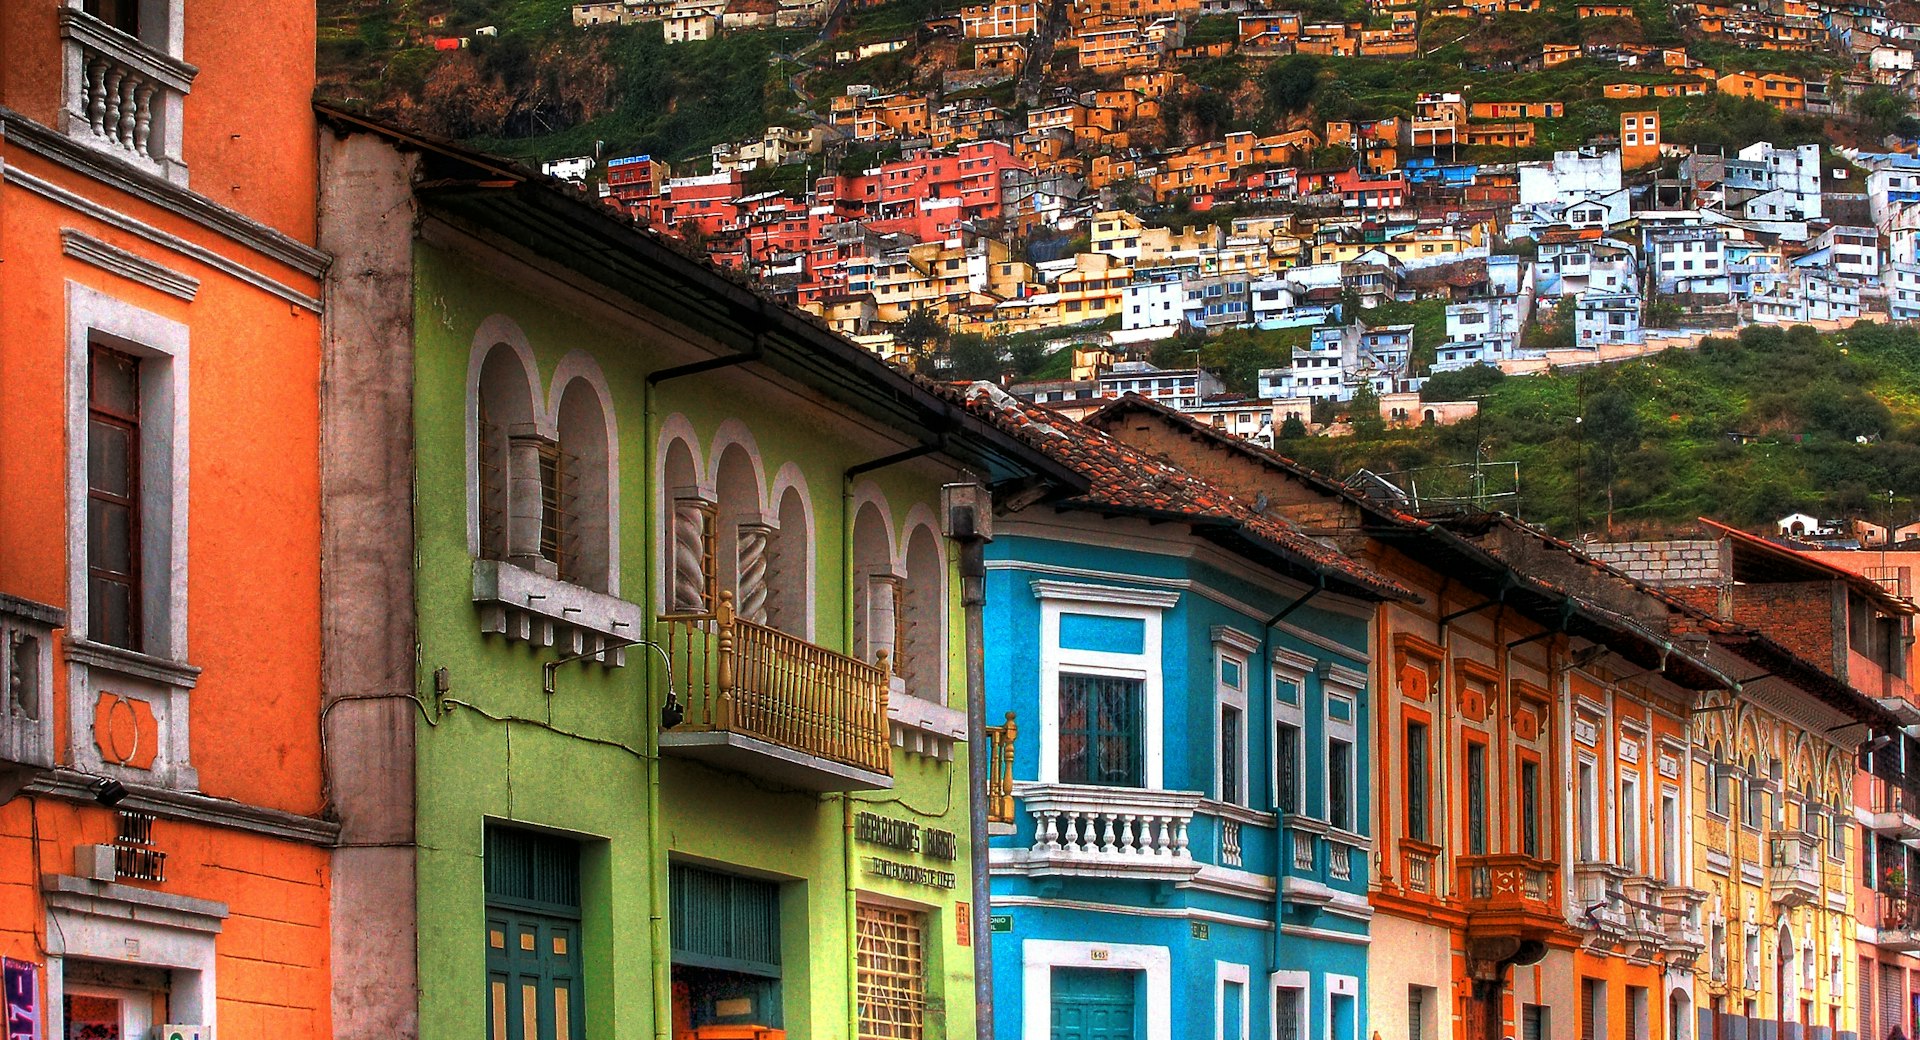 Brightly colored historic homes sit in the foreground with the city of Quito rising on the hillside behind them